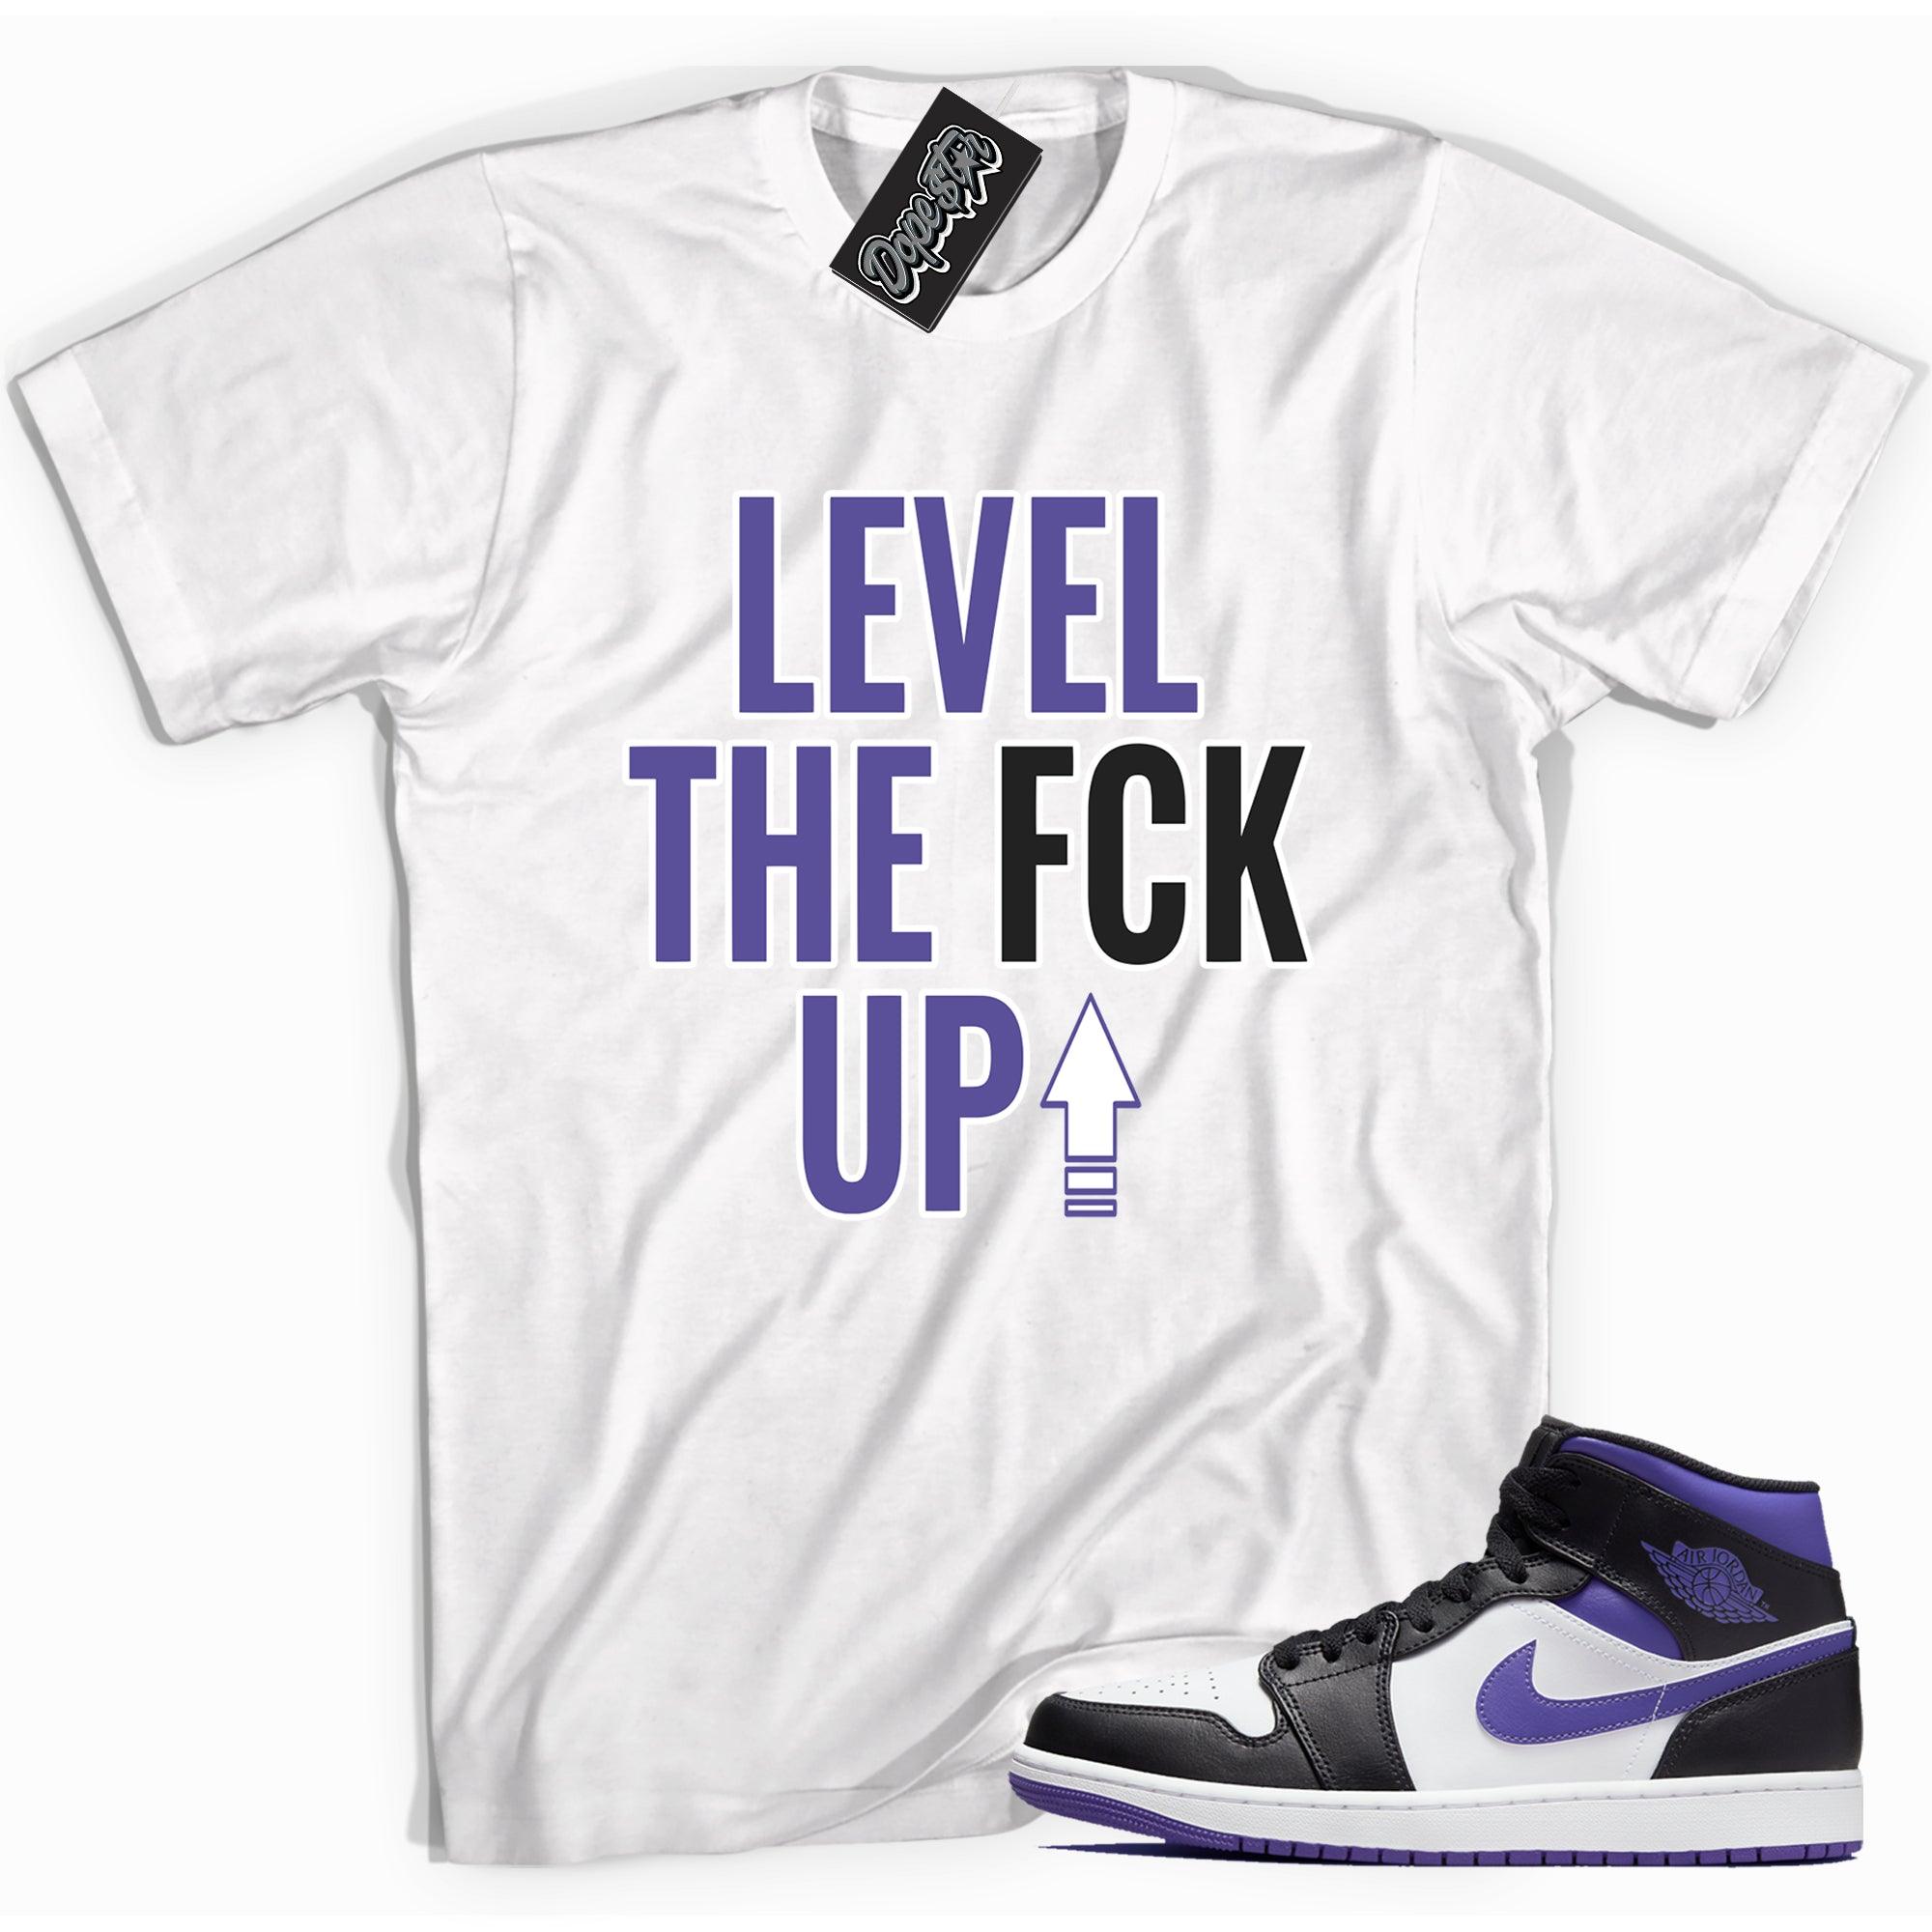 Cool white graphic tee with 'Level Up' print, that perfectly matches Air Jordan 1 Mid White Black Purple sneakers.